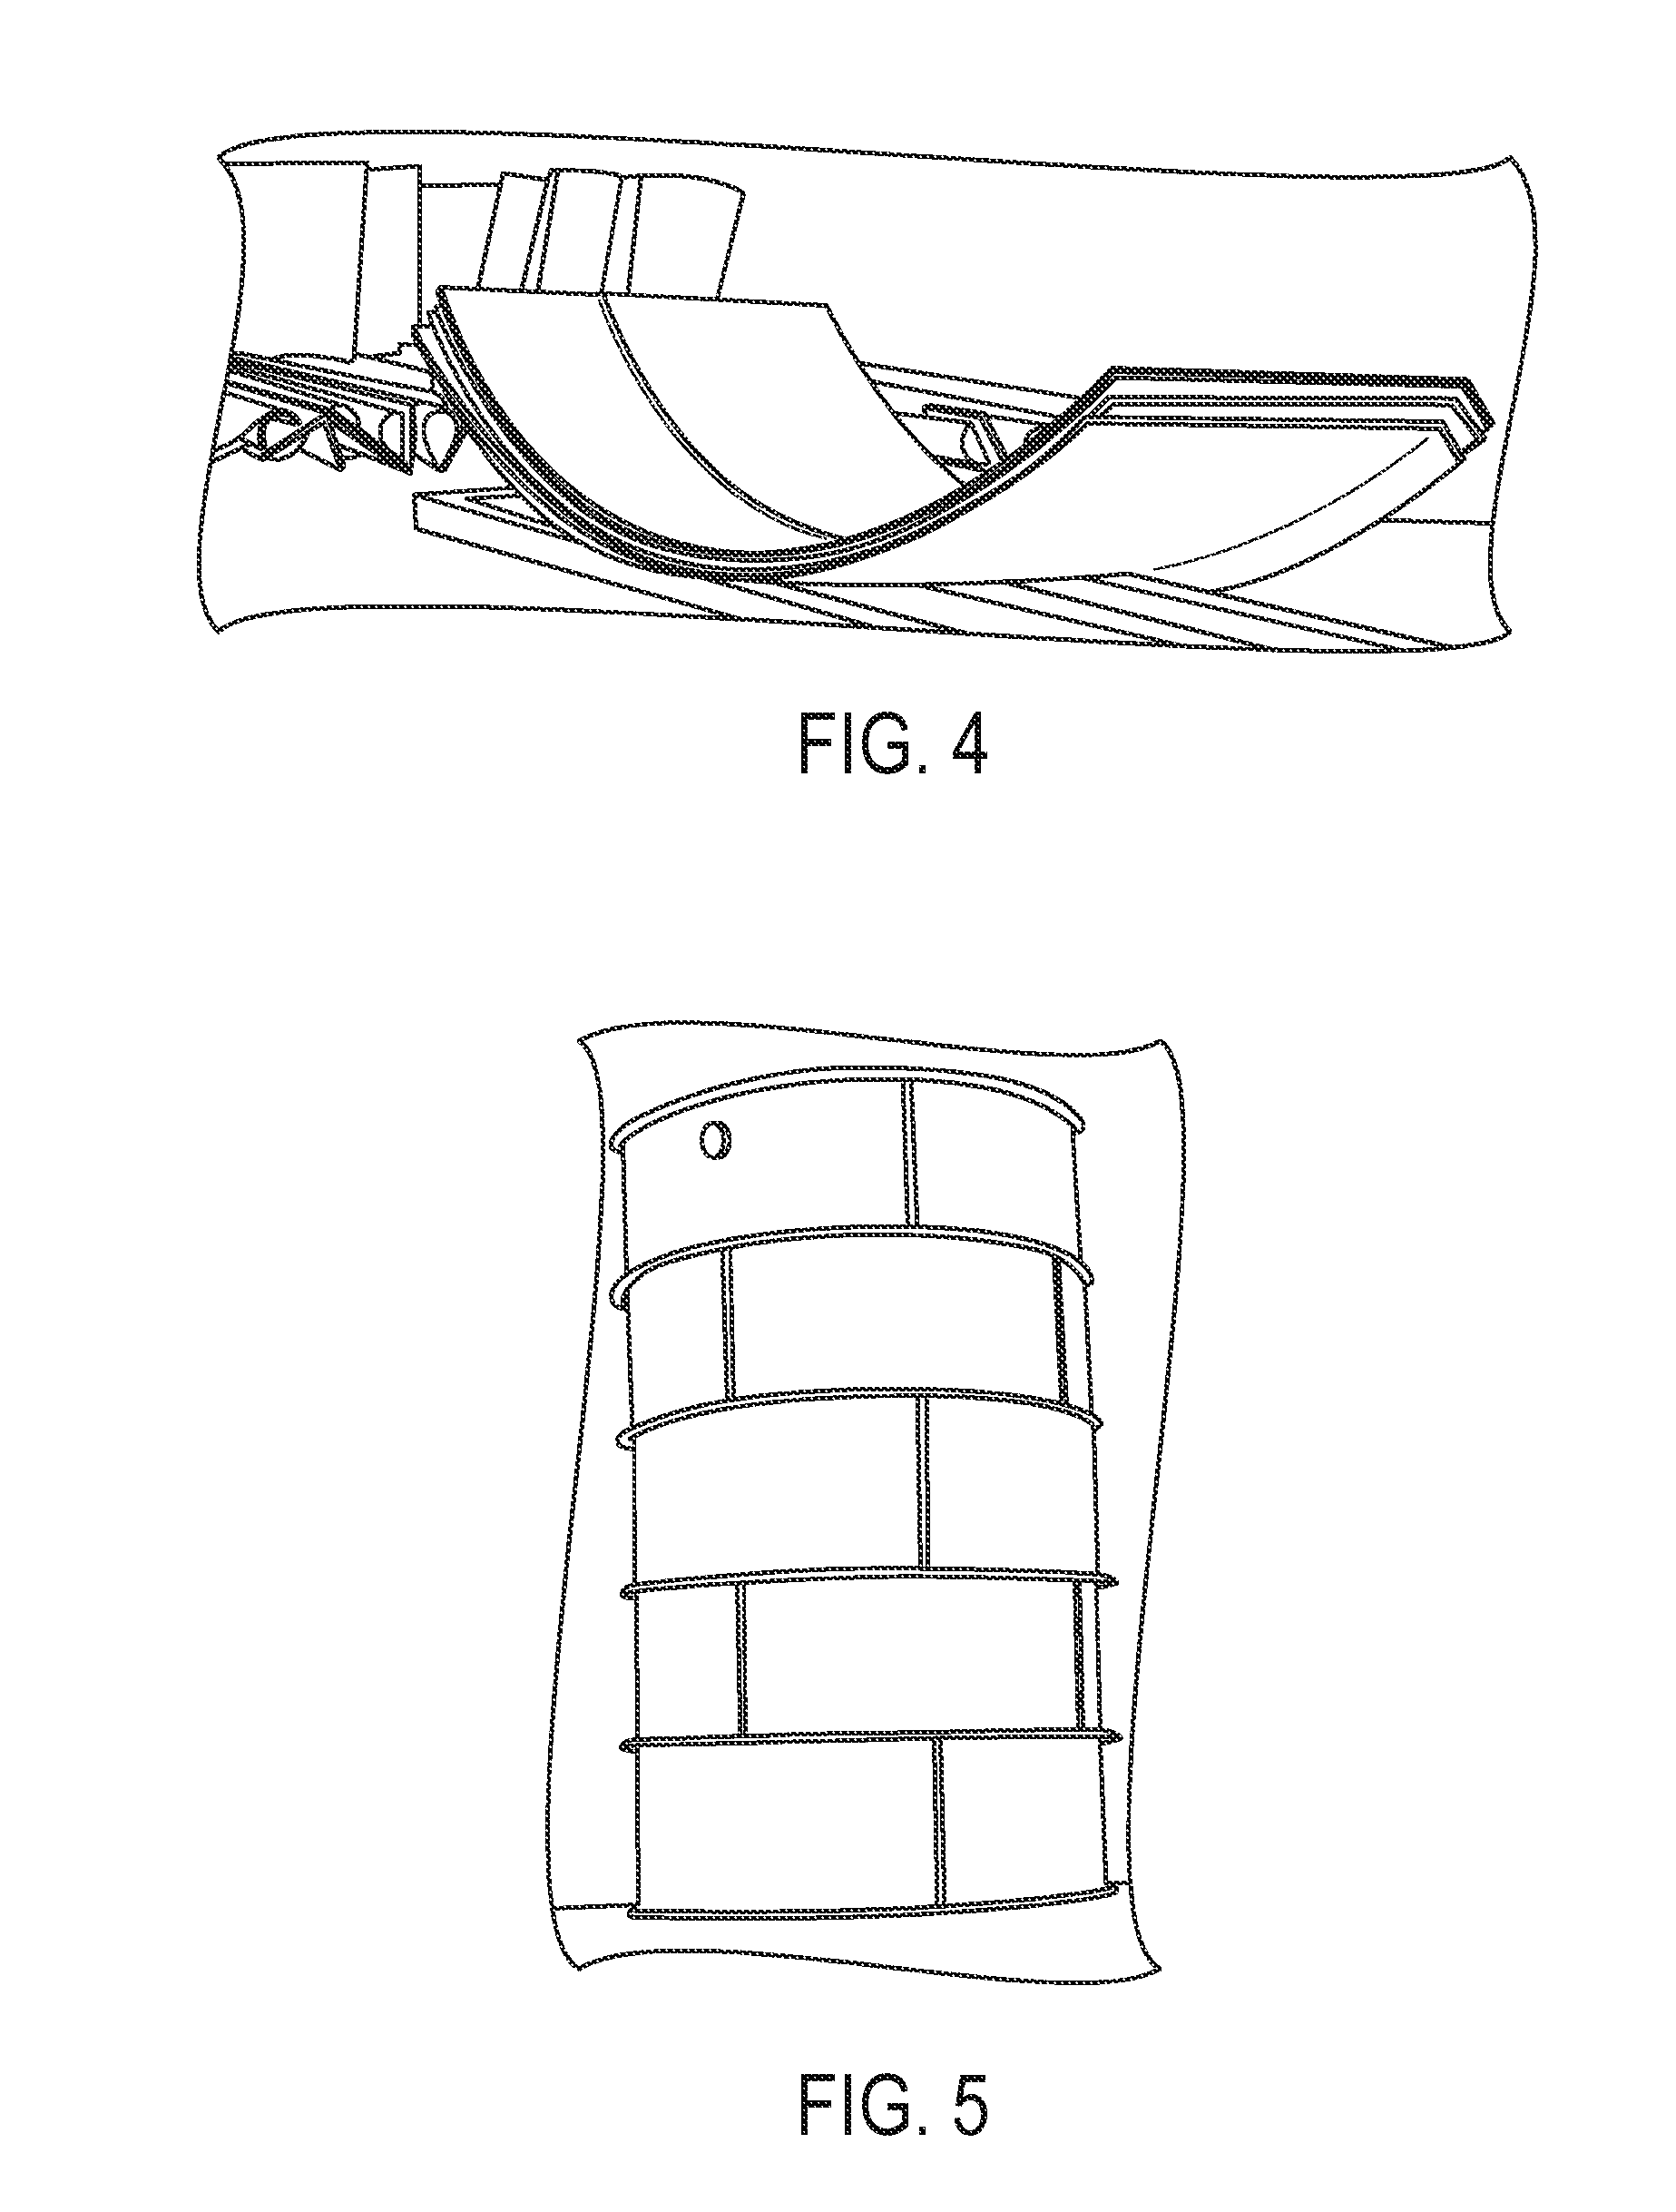 Turbine exhaust duct design for air cooled condensers